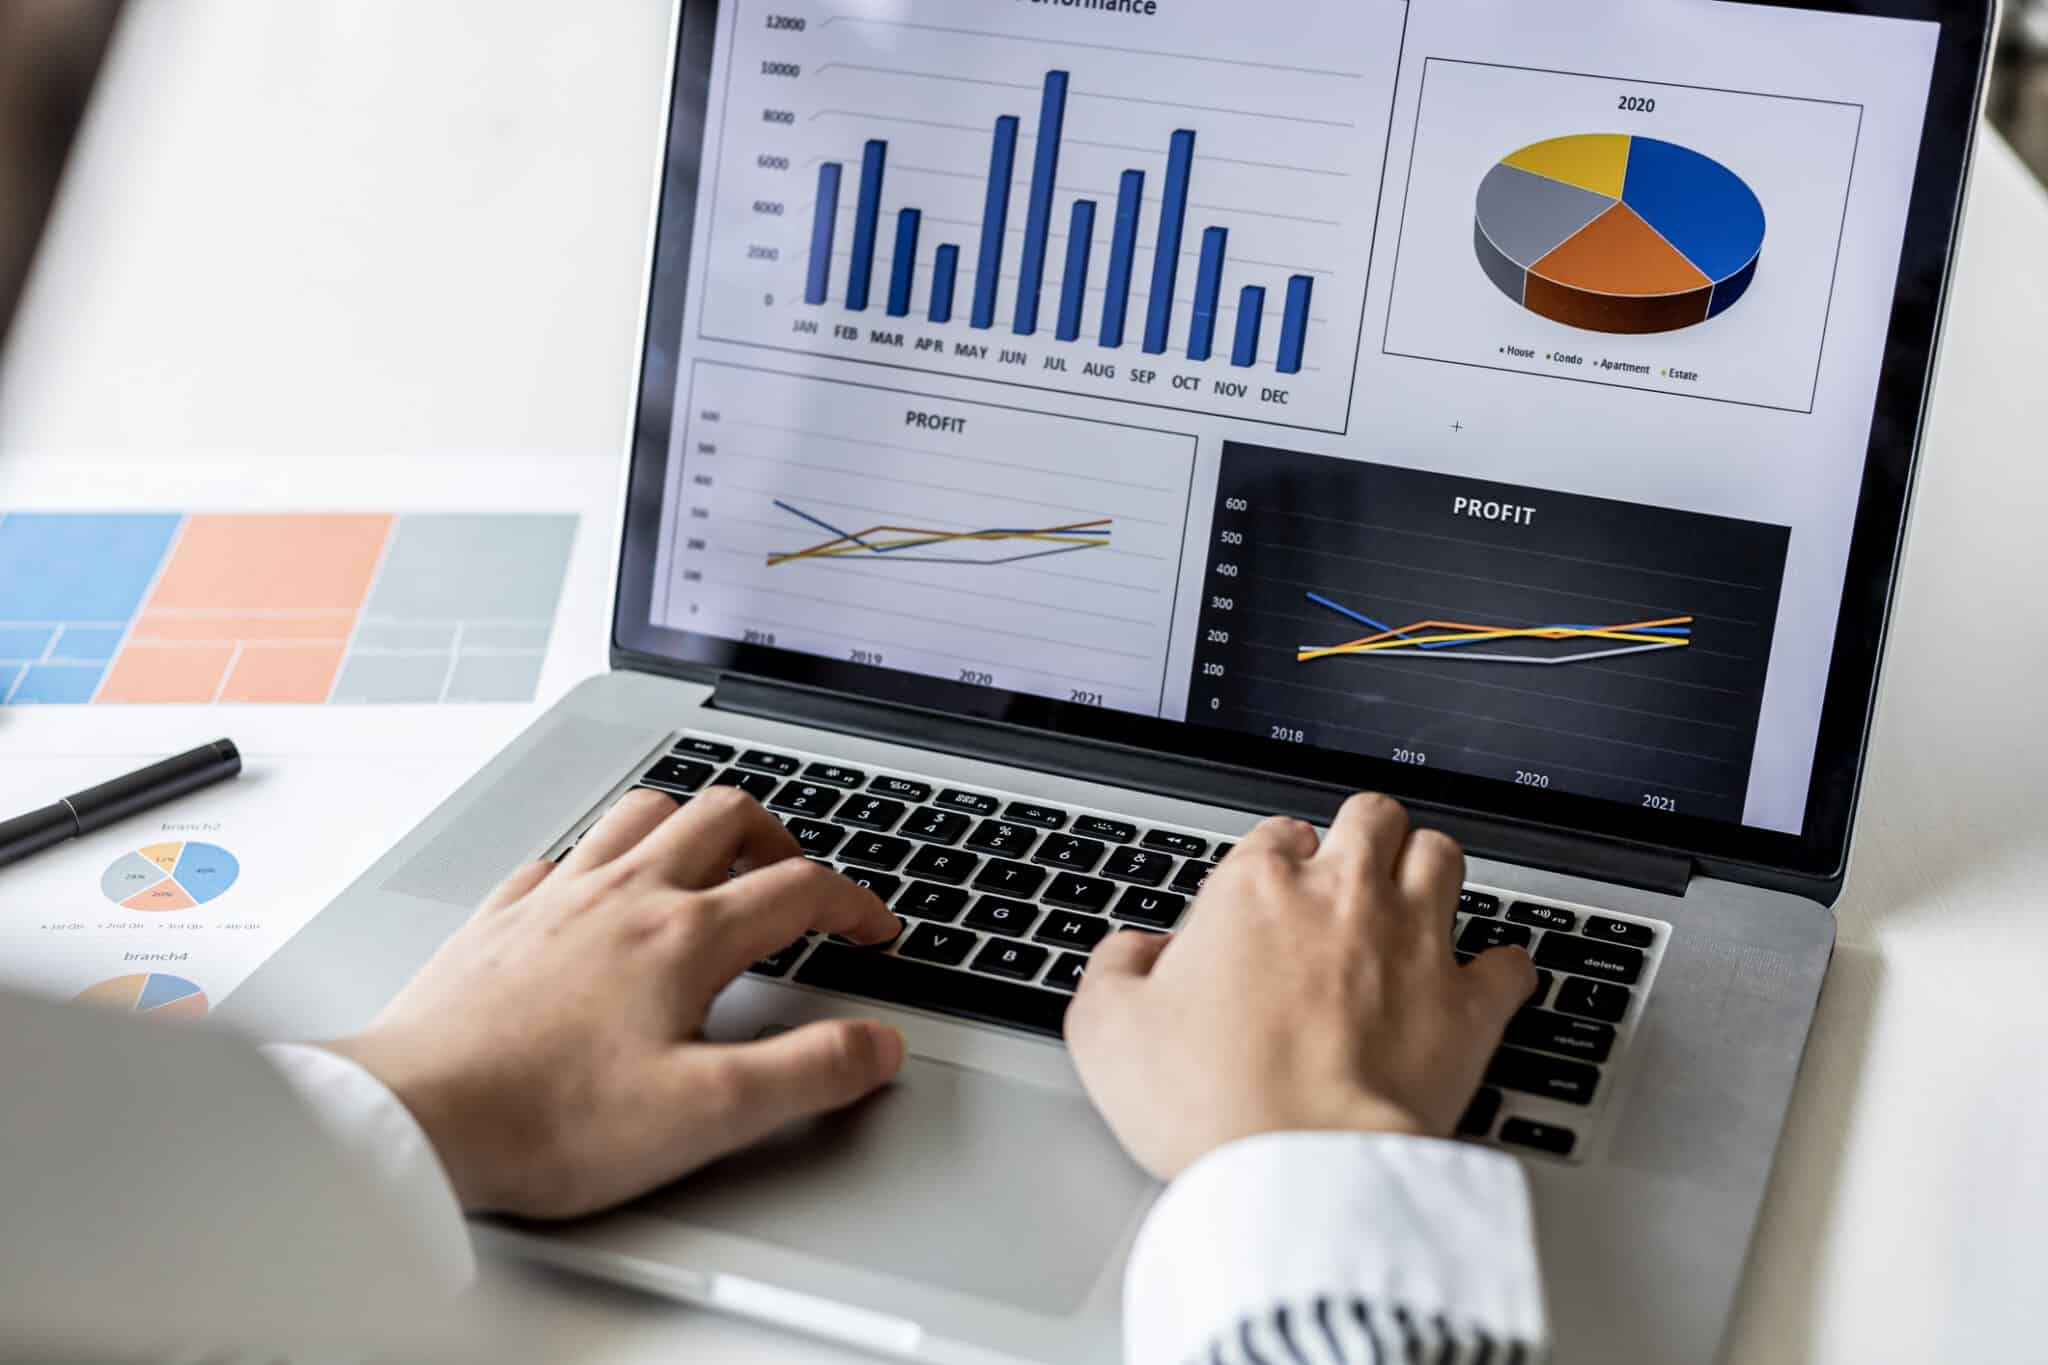 MyCase financial reporting tools can help you measure and hit your financial benchmarking goals. Visit MyCase.com to learn more!